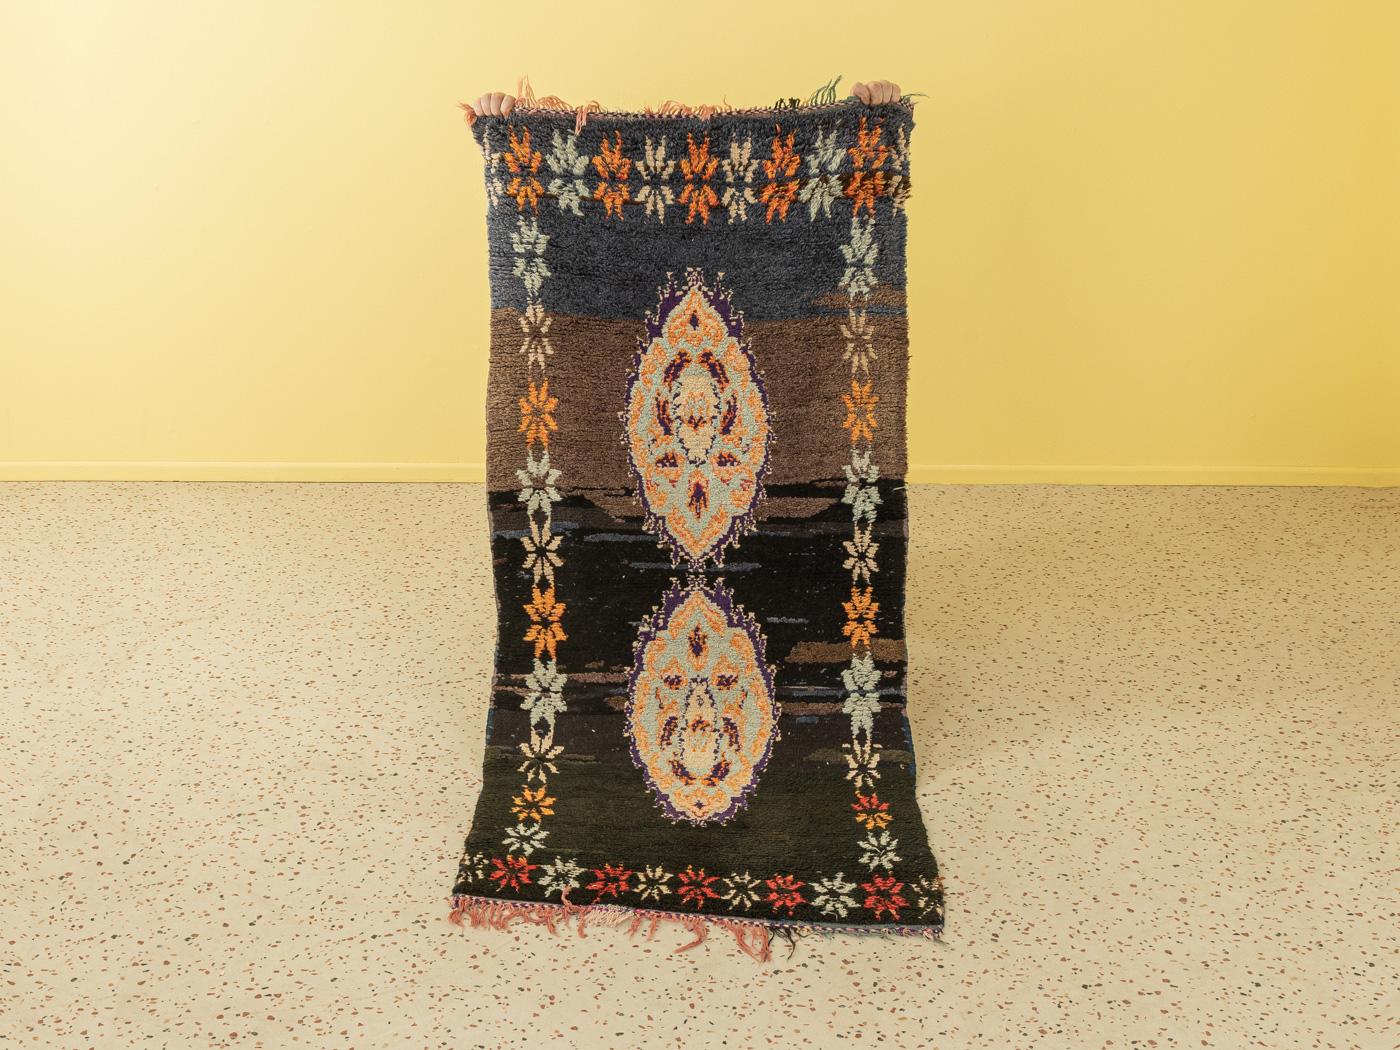 This Vintage Azilal is a 100 % wool rug – soft and comfortable underfoot. Our Berber rugs are handmade, one knot at a time. Each of our Berber rugs is a long-lasting one-of-a-kind piece, created in a sustainable manner with local wool.
Quality